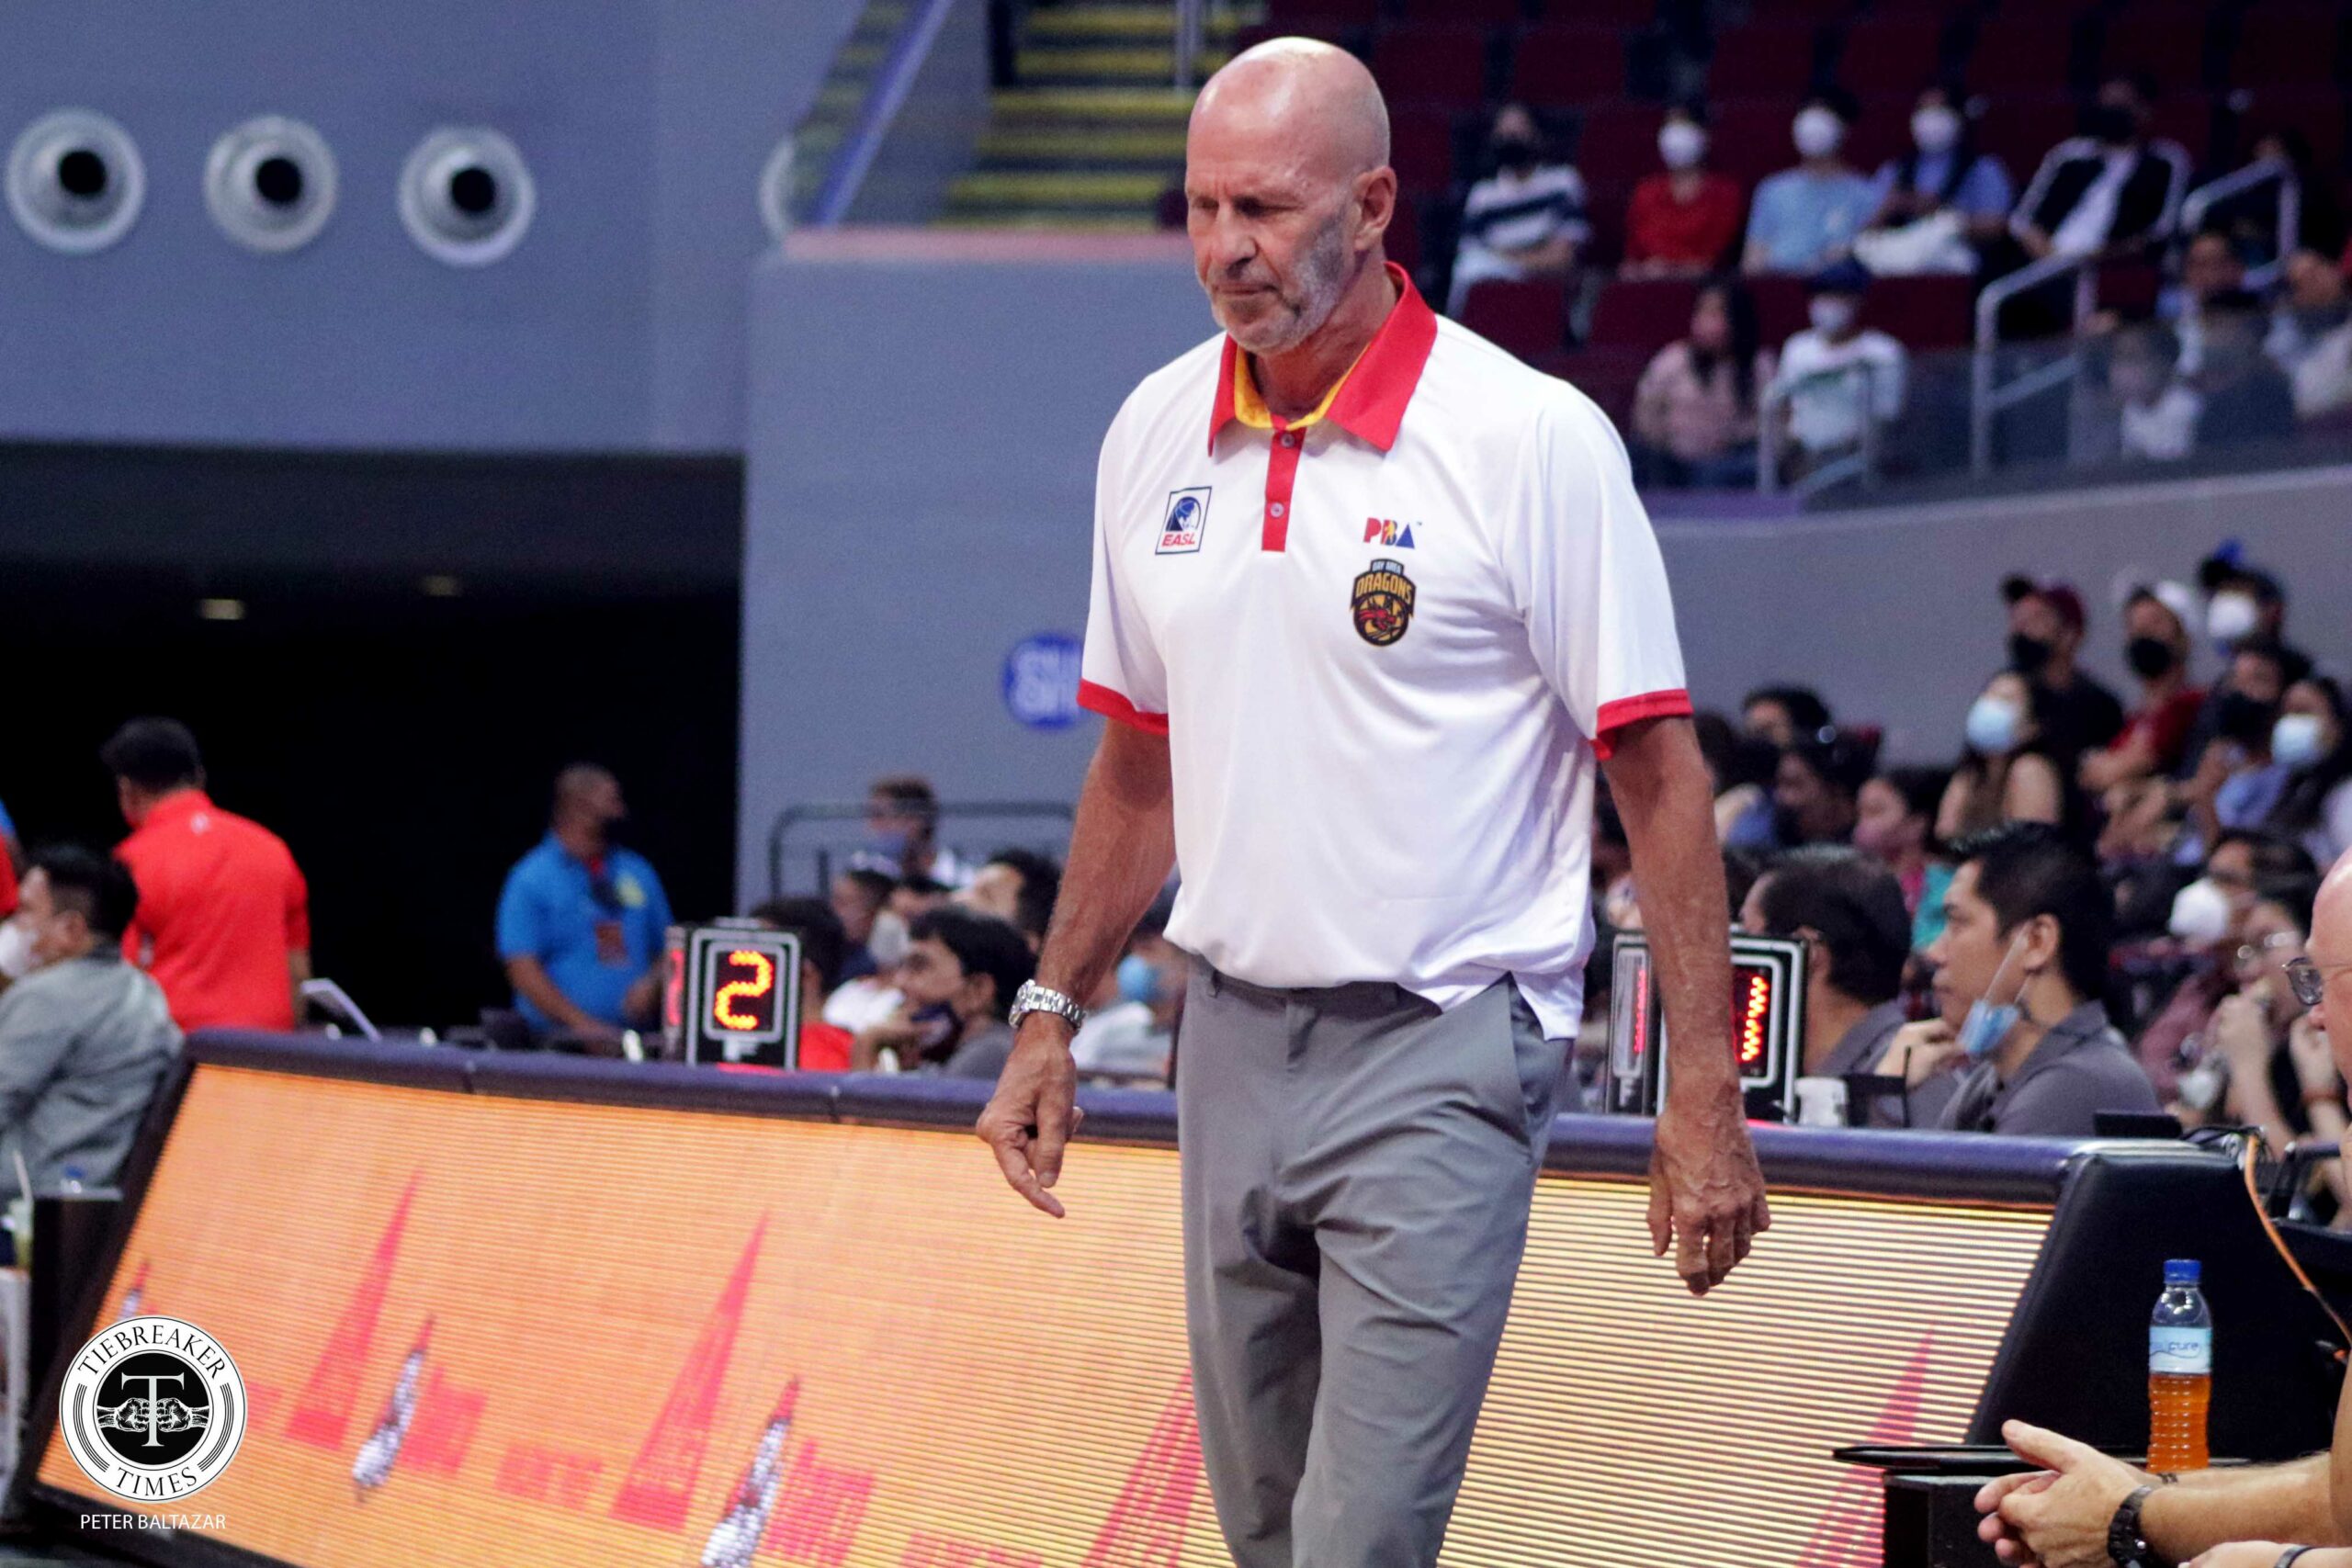 2022-PBA-Commissioners-Cup-Bay-Area-vs-Northport-Brian-Goorjian-scaled Goorjian plays down brief confrontation with Pido: 'It's us that has to learn' Basketball News PBA  - philippine sports news